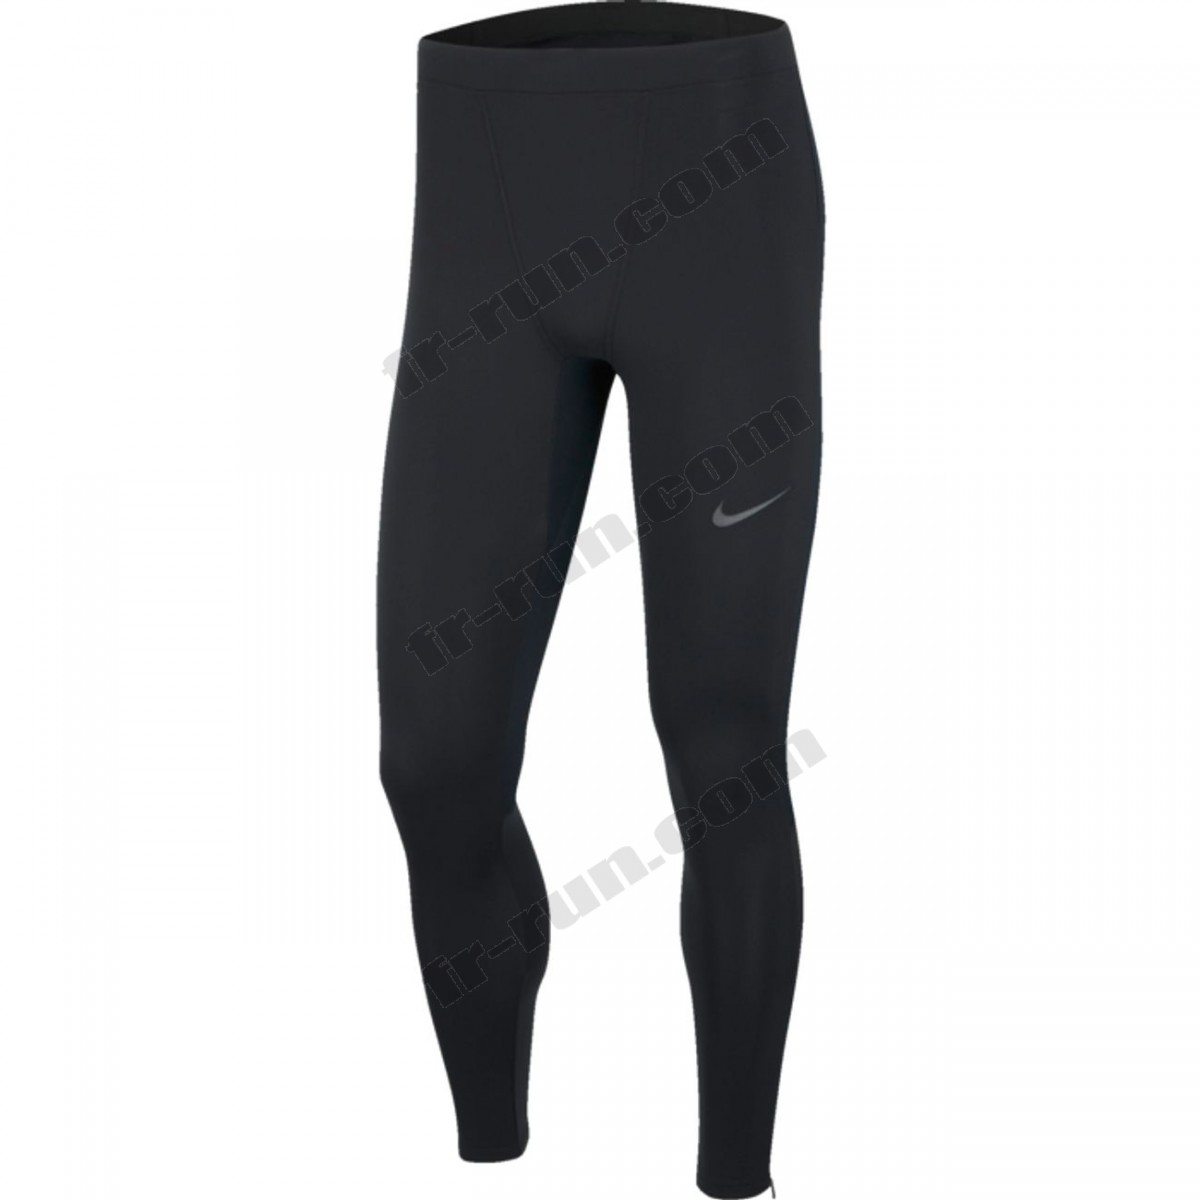 Nike/COLLANT running homme NIKE MBLTY THRML RPL ◇◇◇ Pas Cher Du Tout - -0